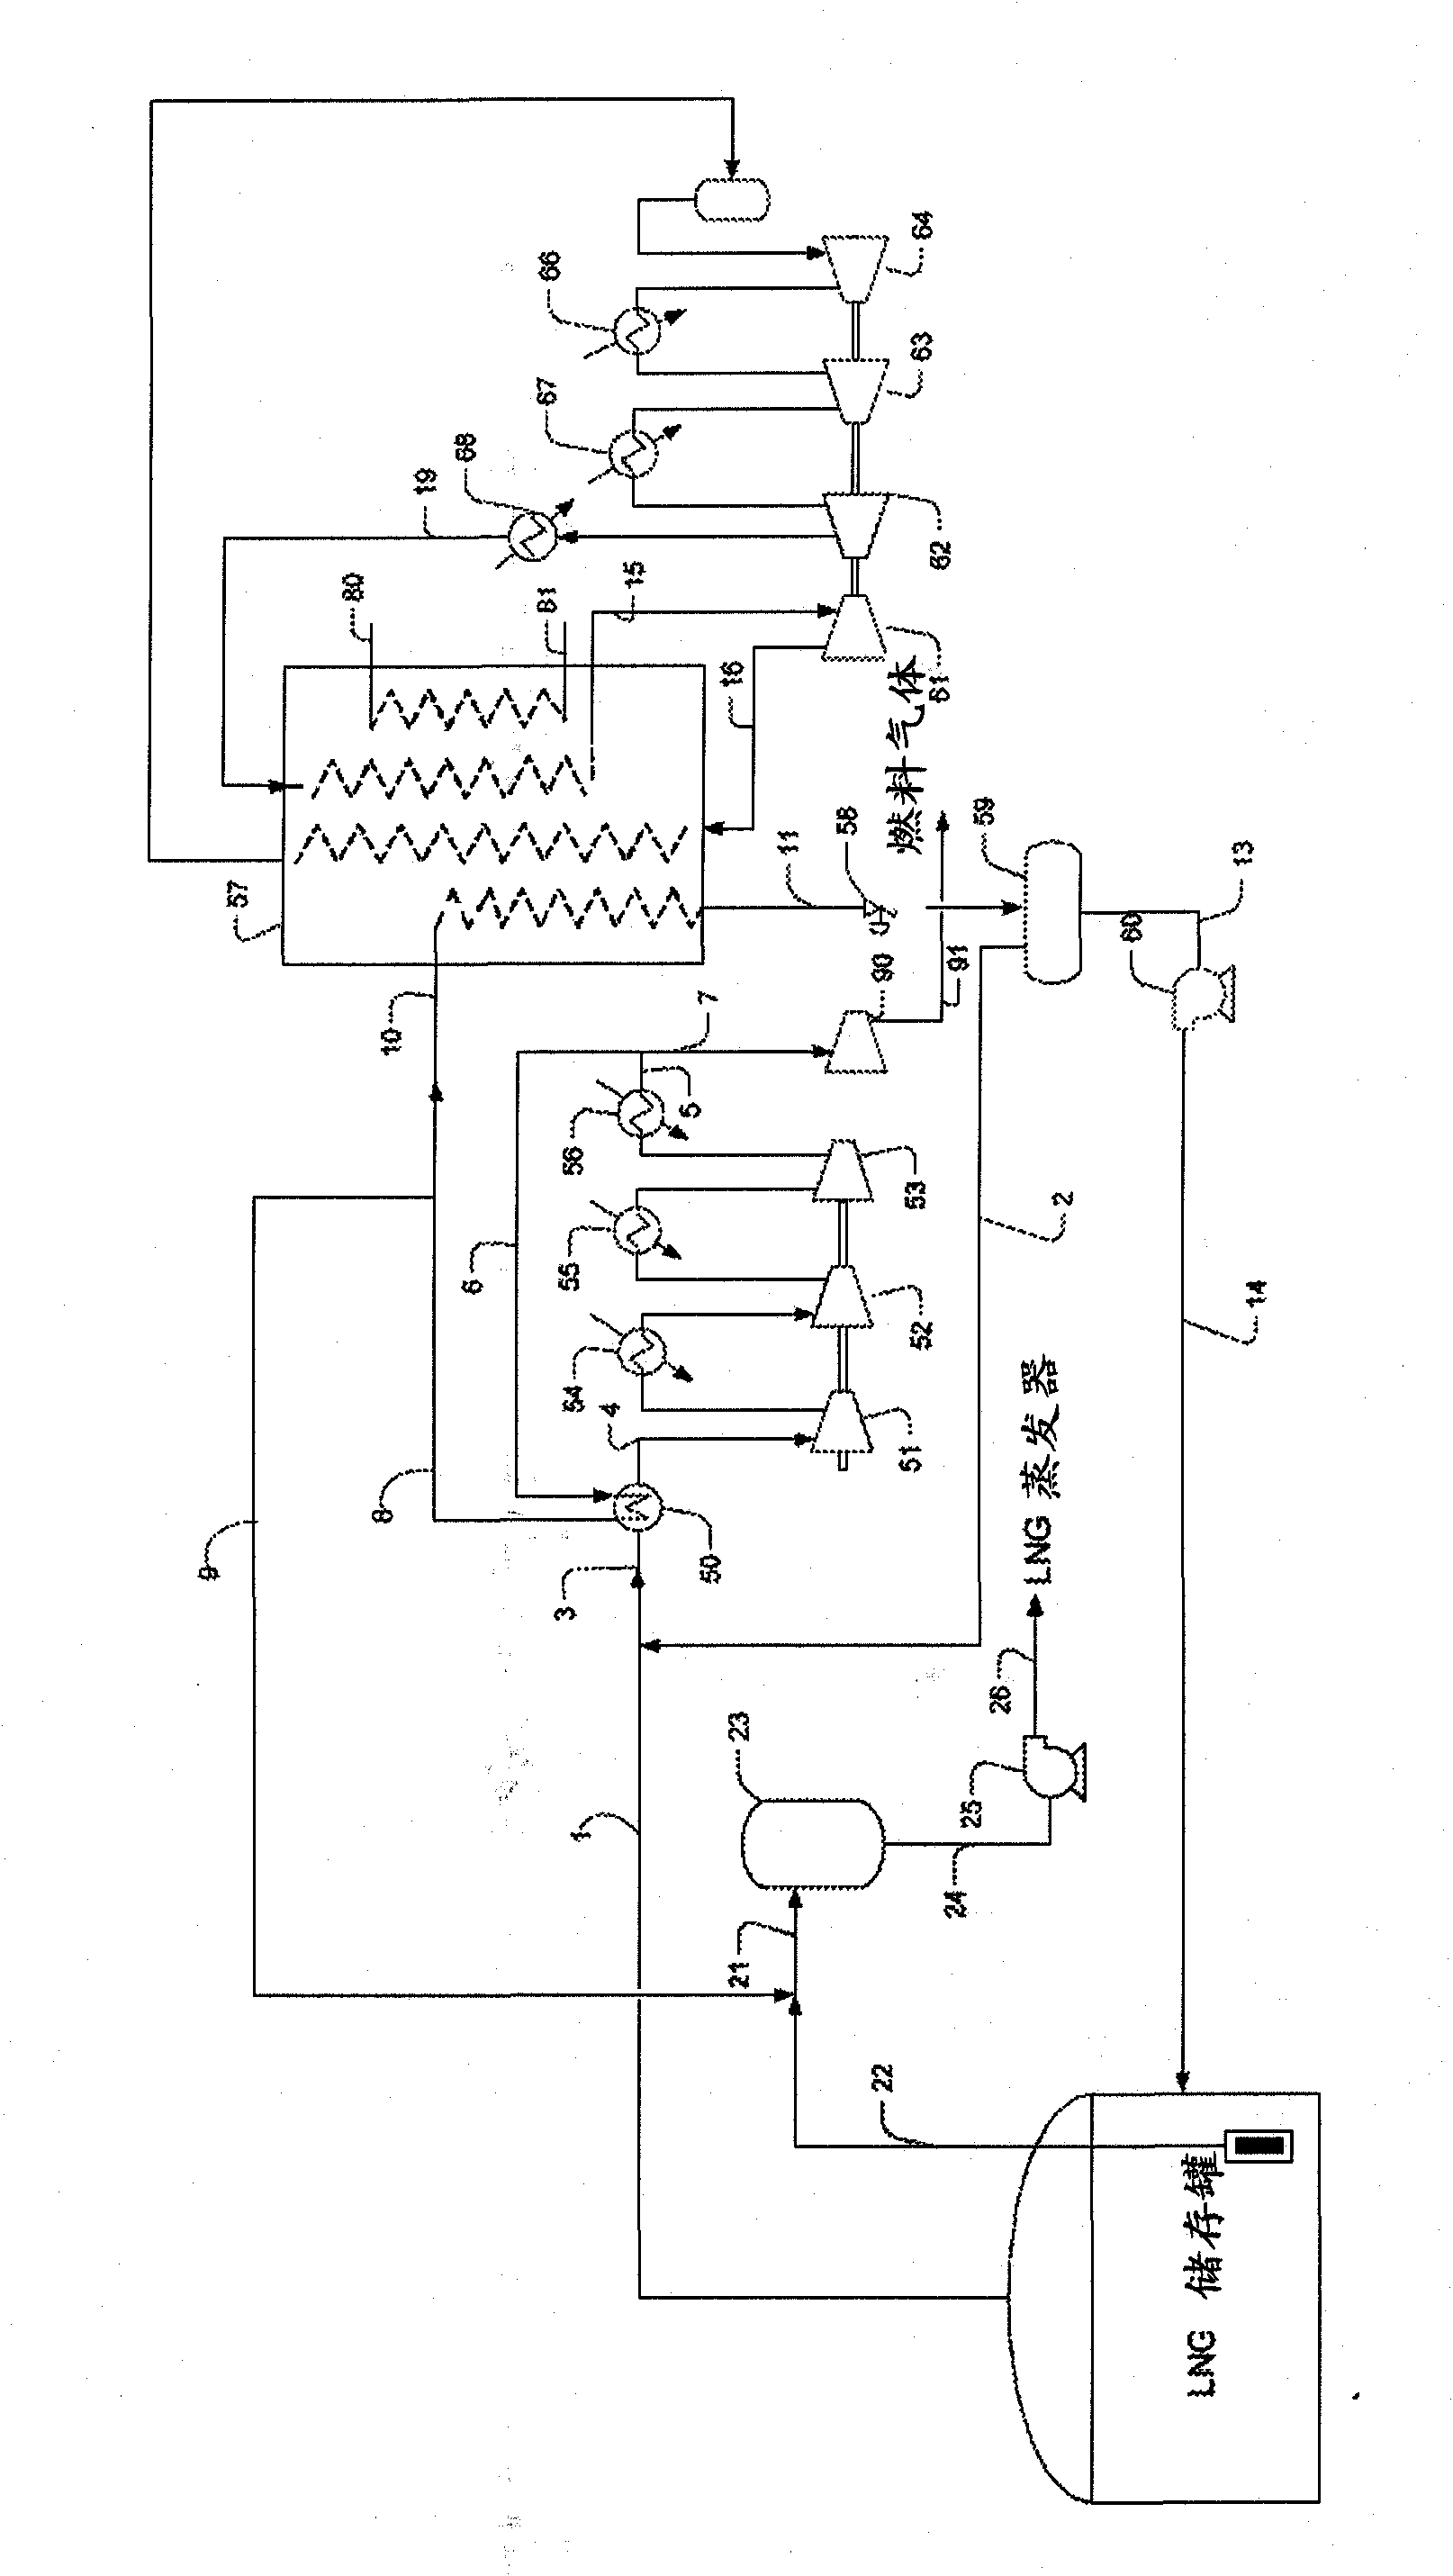 Methods and configuration of boil-off gas handling in LNG regasification terminals